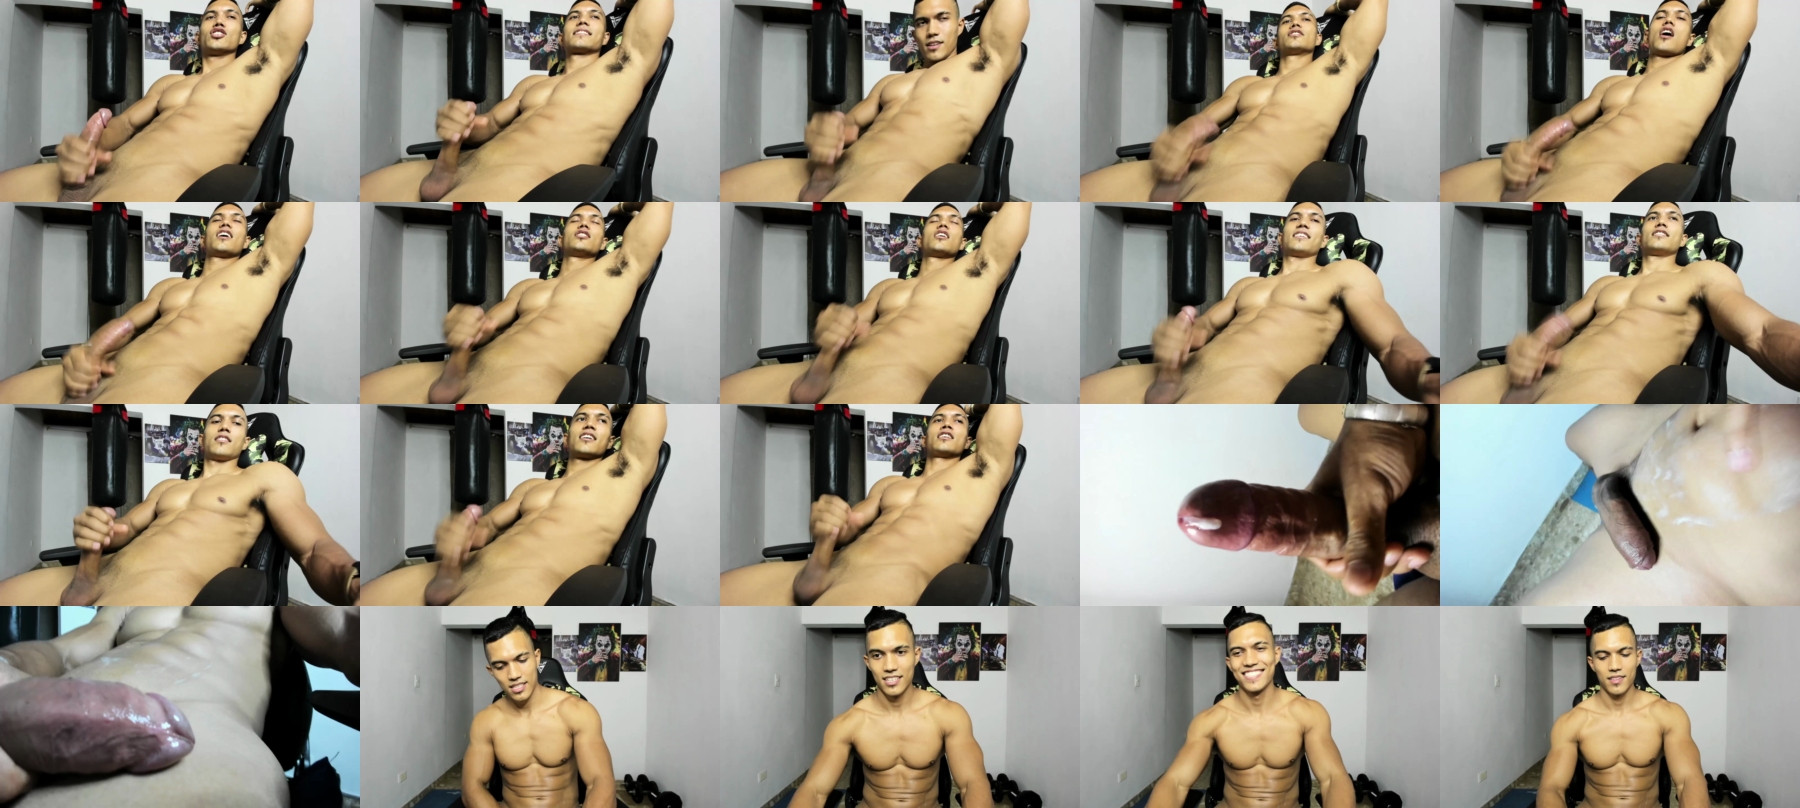 Exquisite_Gabe  19-04-2021 Male Naked